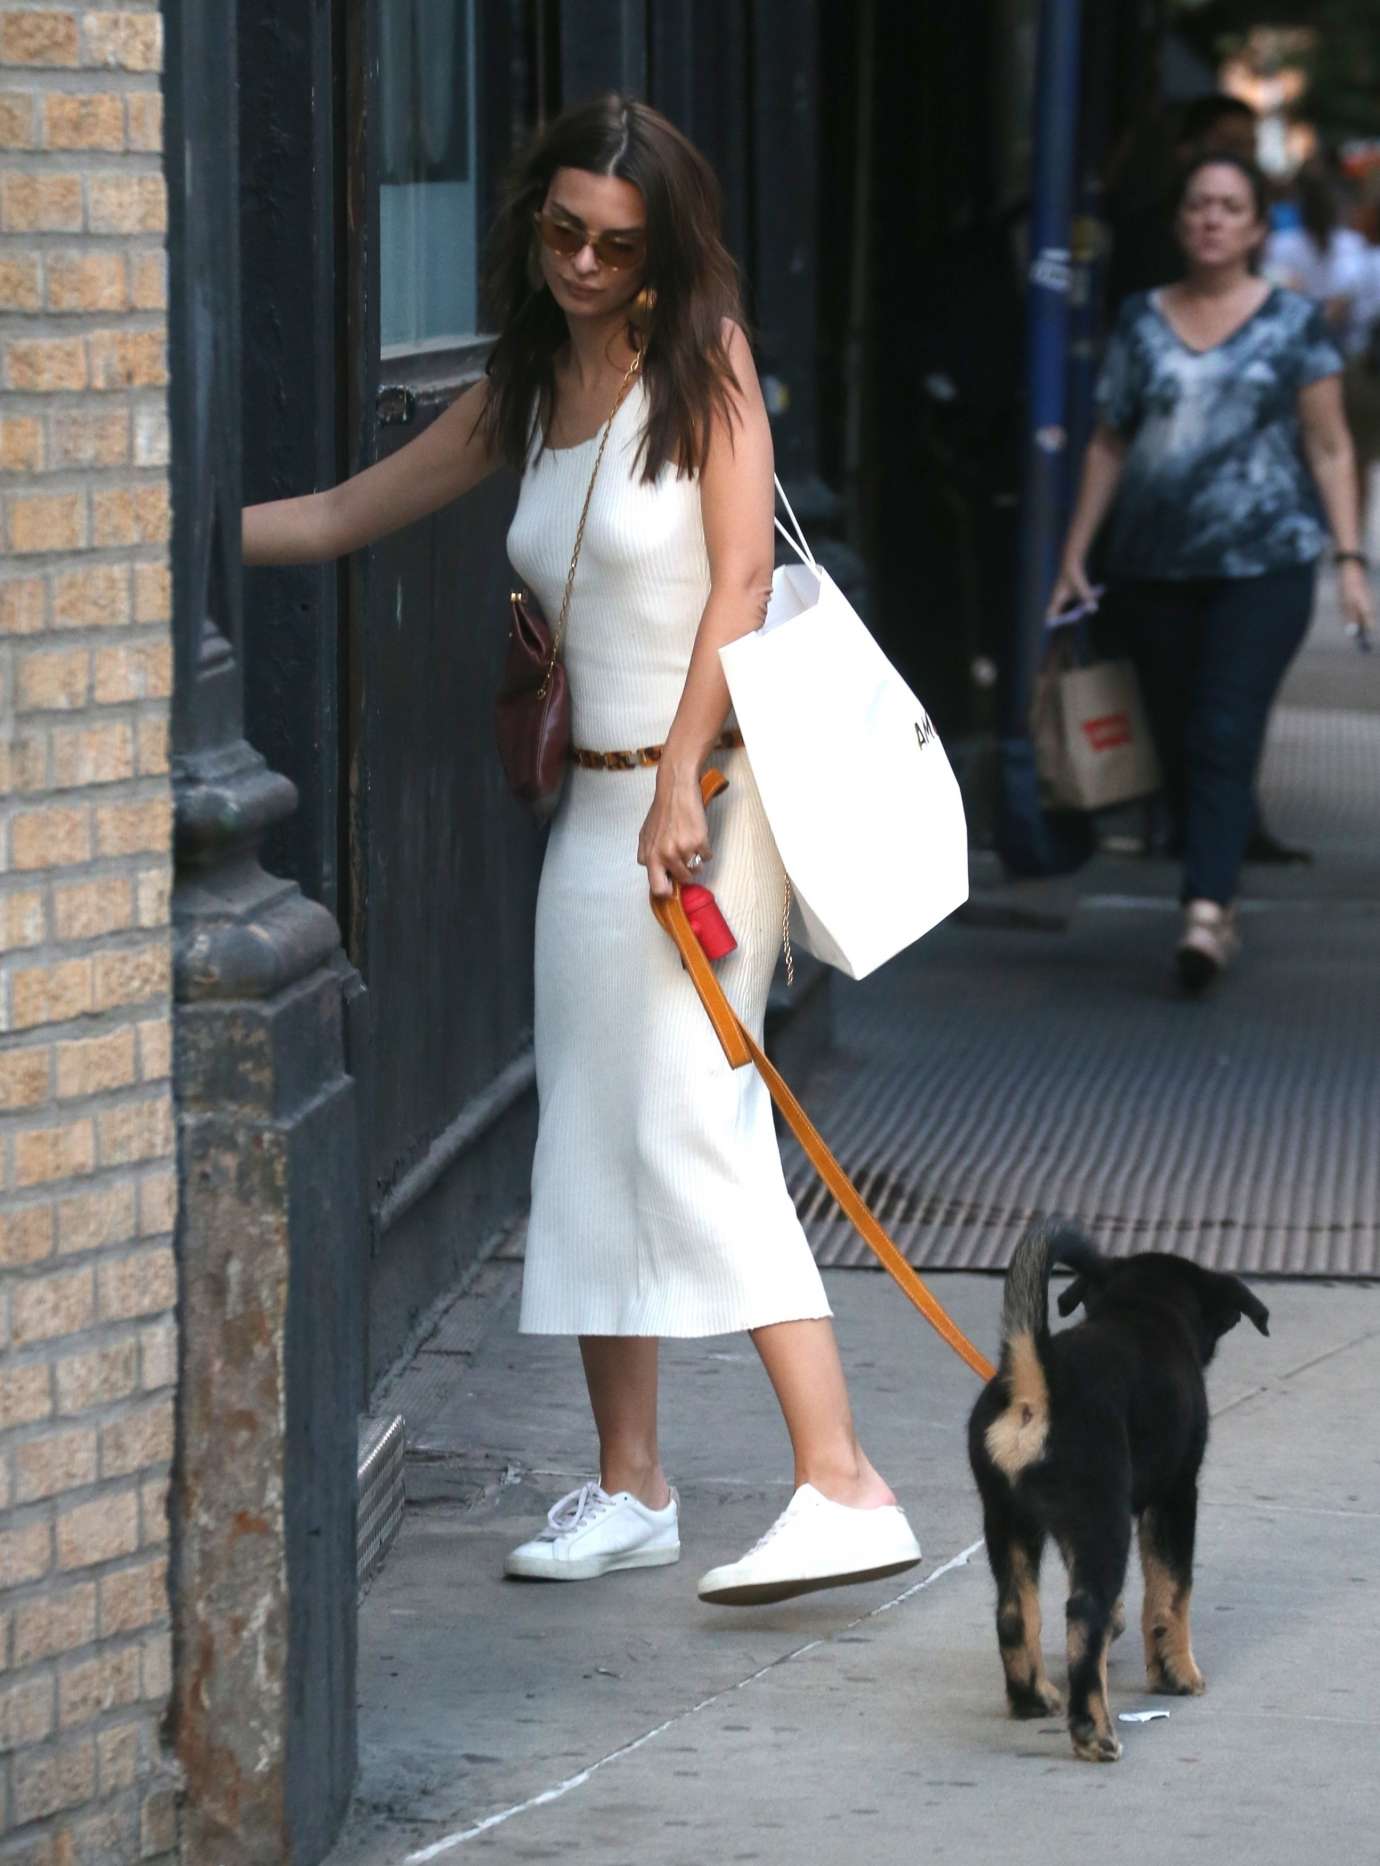 Emily Ratajkowski â€“ With her dog out in NYC